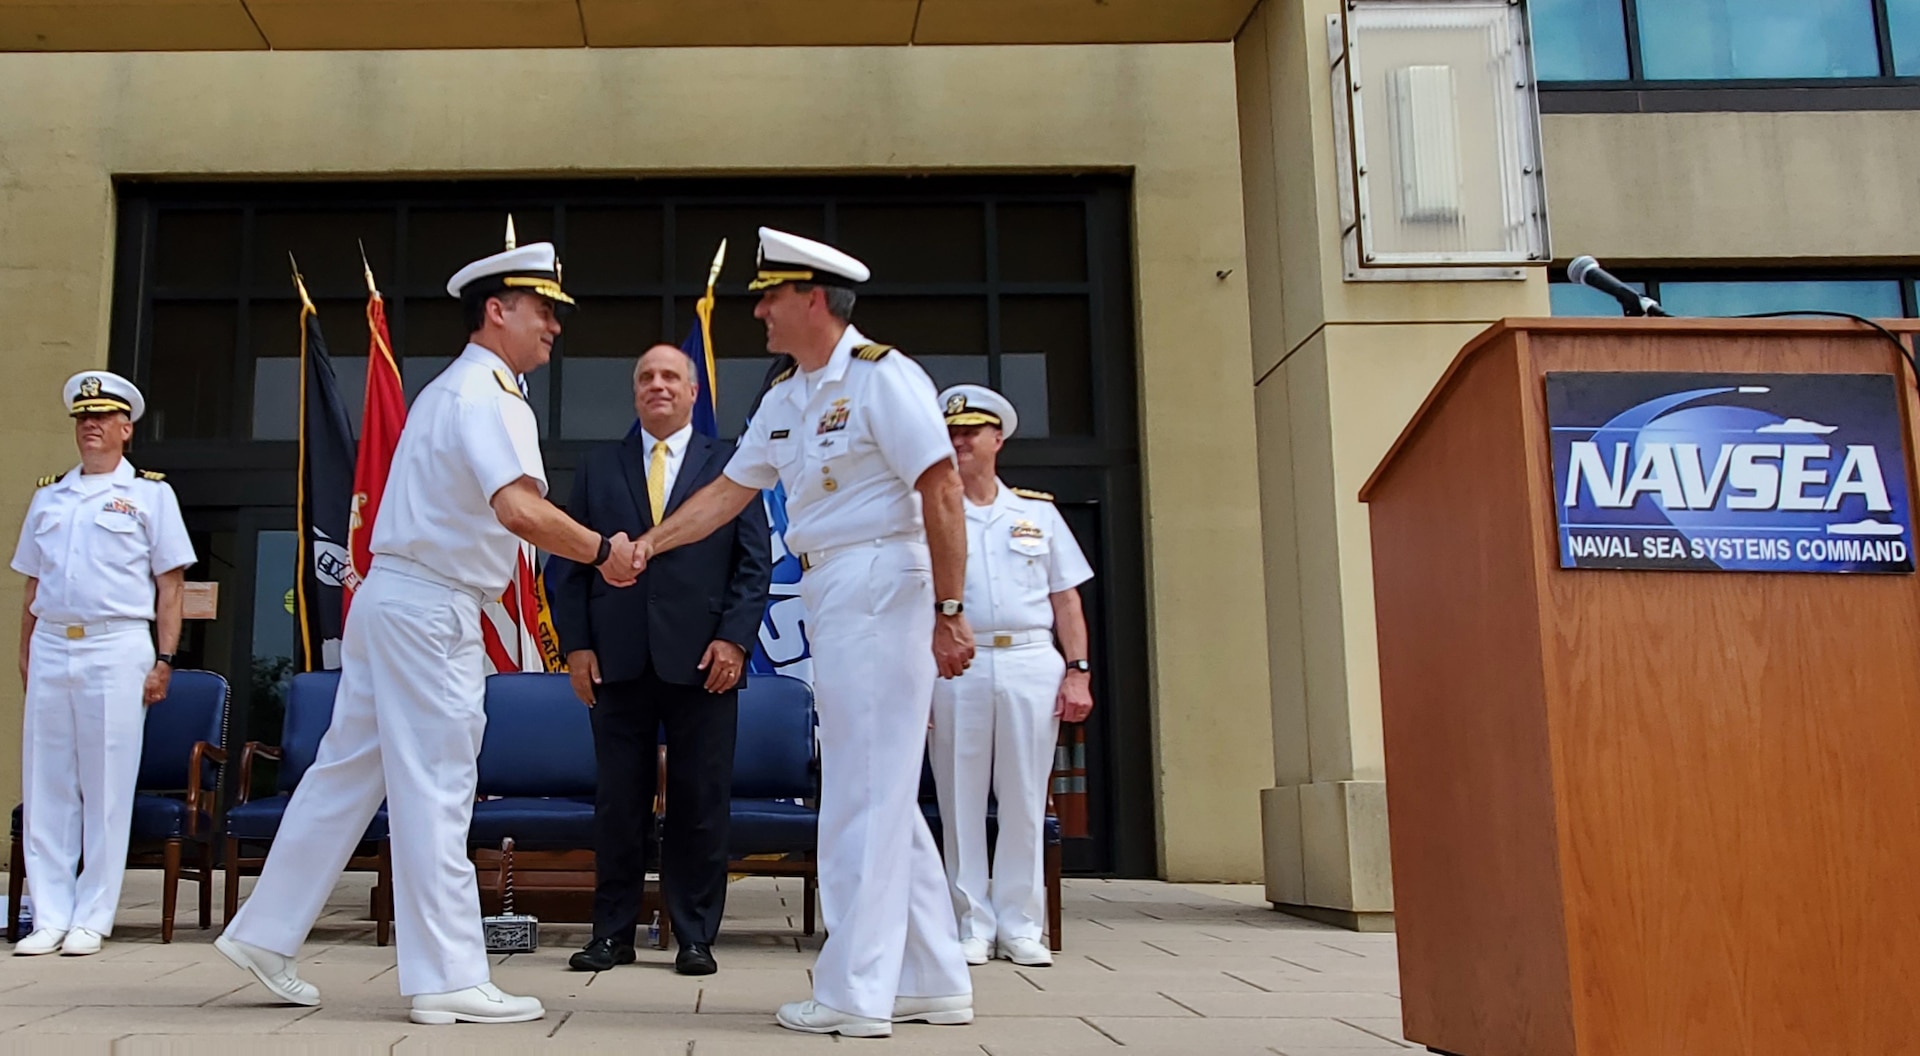 Rear Adm. Dave Goggins congratulates Capt. Lincoln Reifsteck upon relieving him as the Program Manager of the AUKUS Integration and Acquisition program office. Mr. Jay Stefany, Acting  Assistant Secretary of the Navy for Research, Development, and Acquisition oversaw the event at the Washington Navy Yard. (Courtesy Photo)